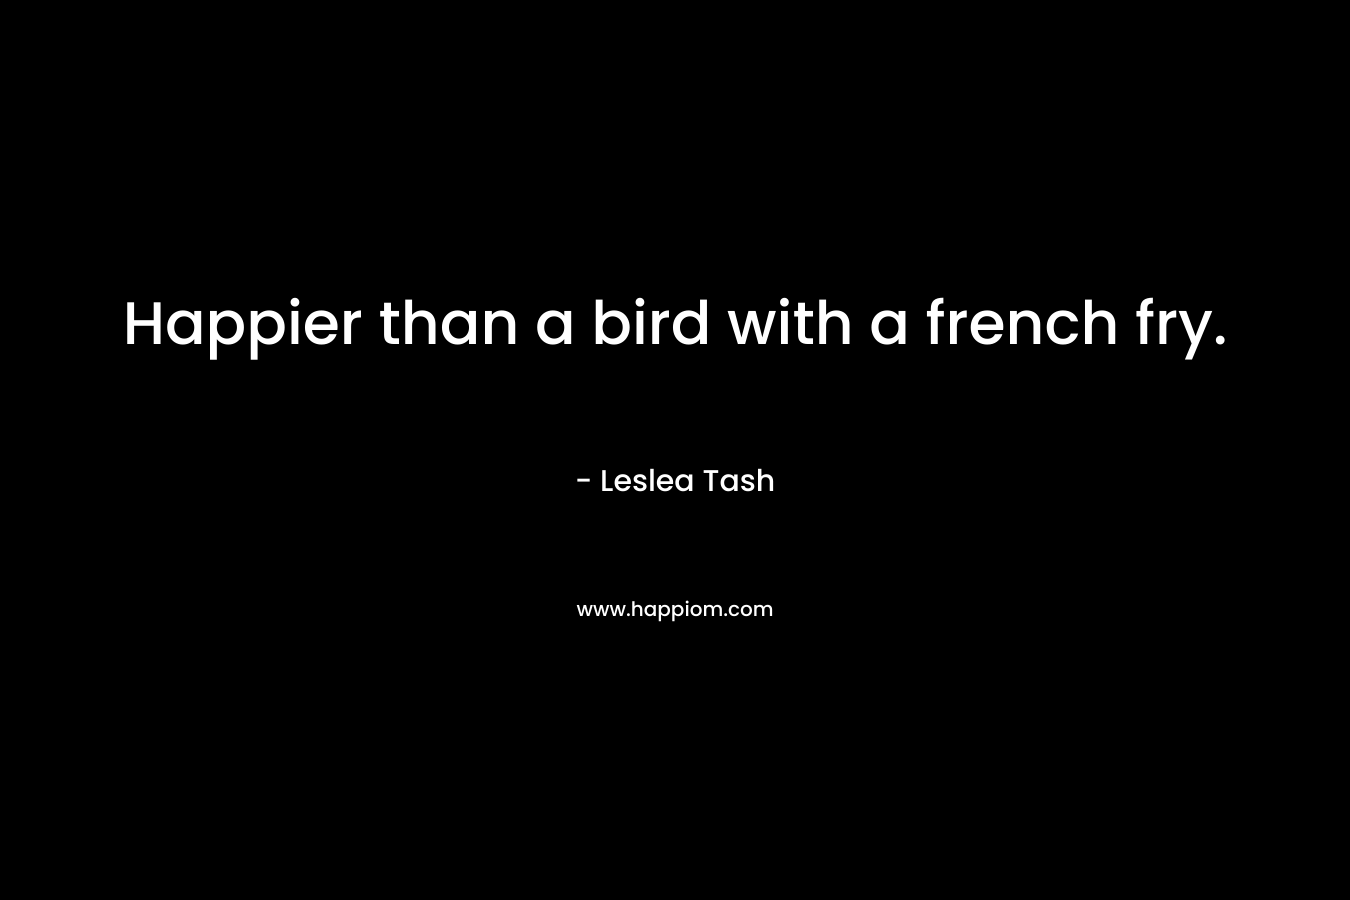 Happier than a bird with a french fry. – Leslea Tash